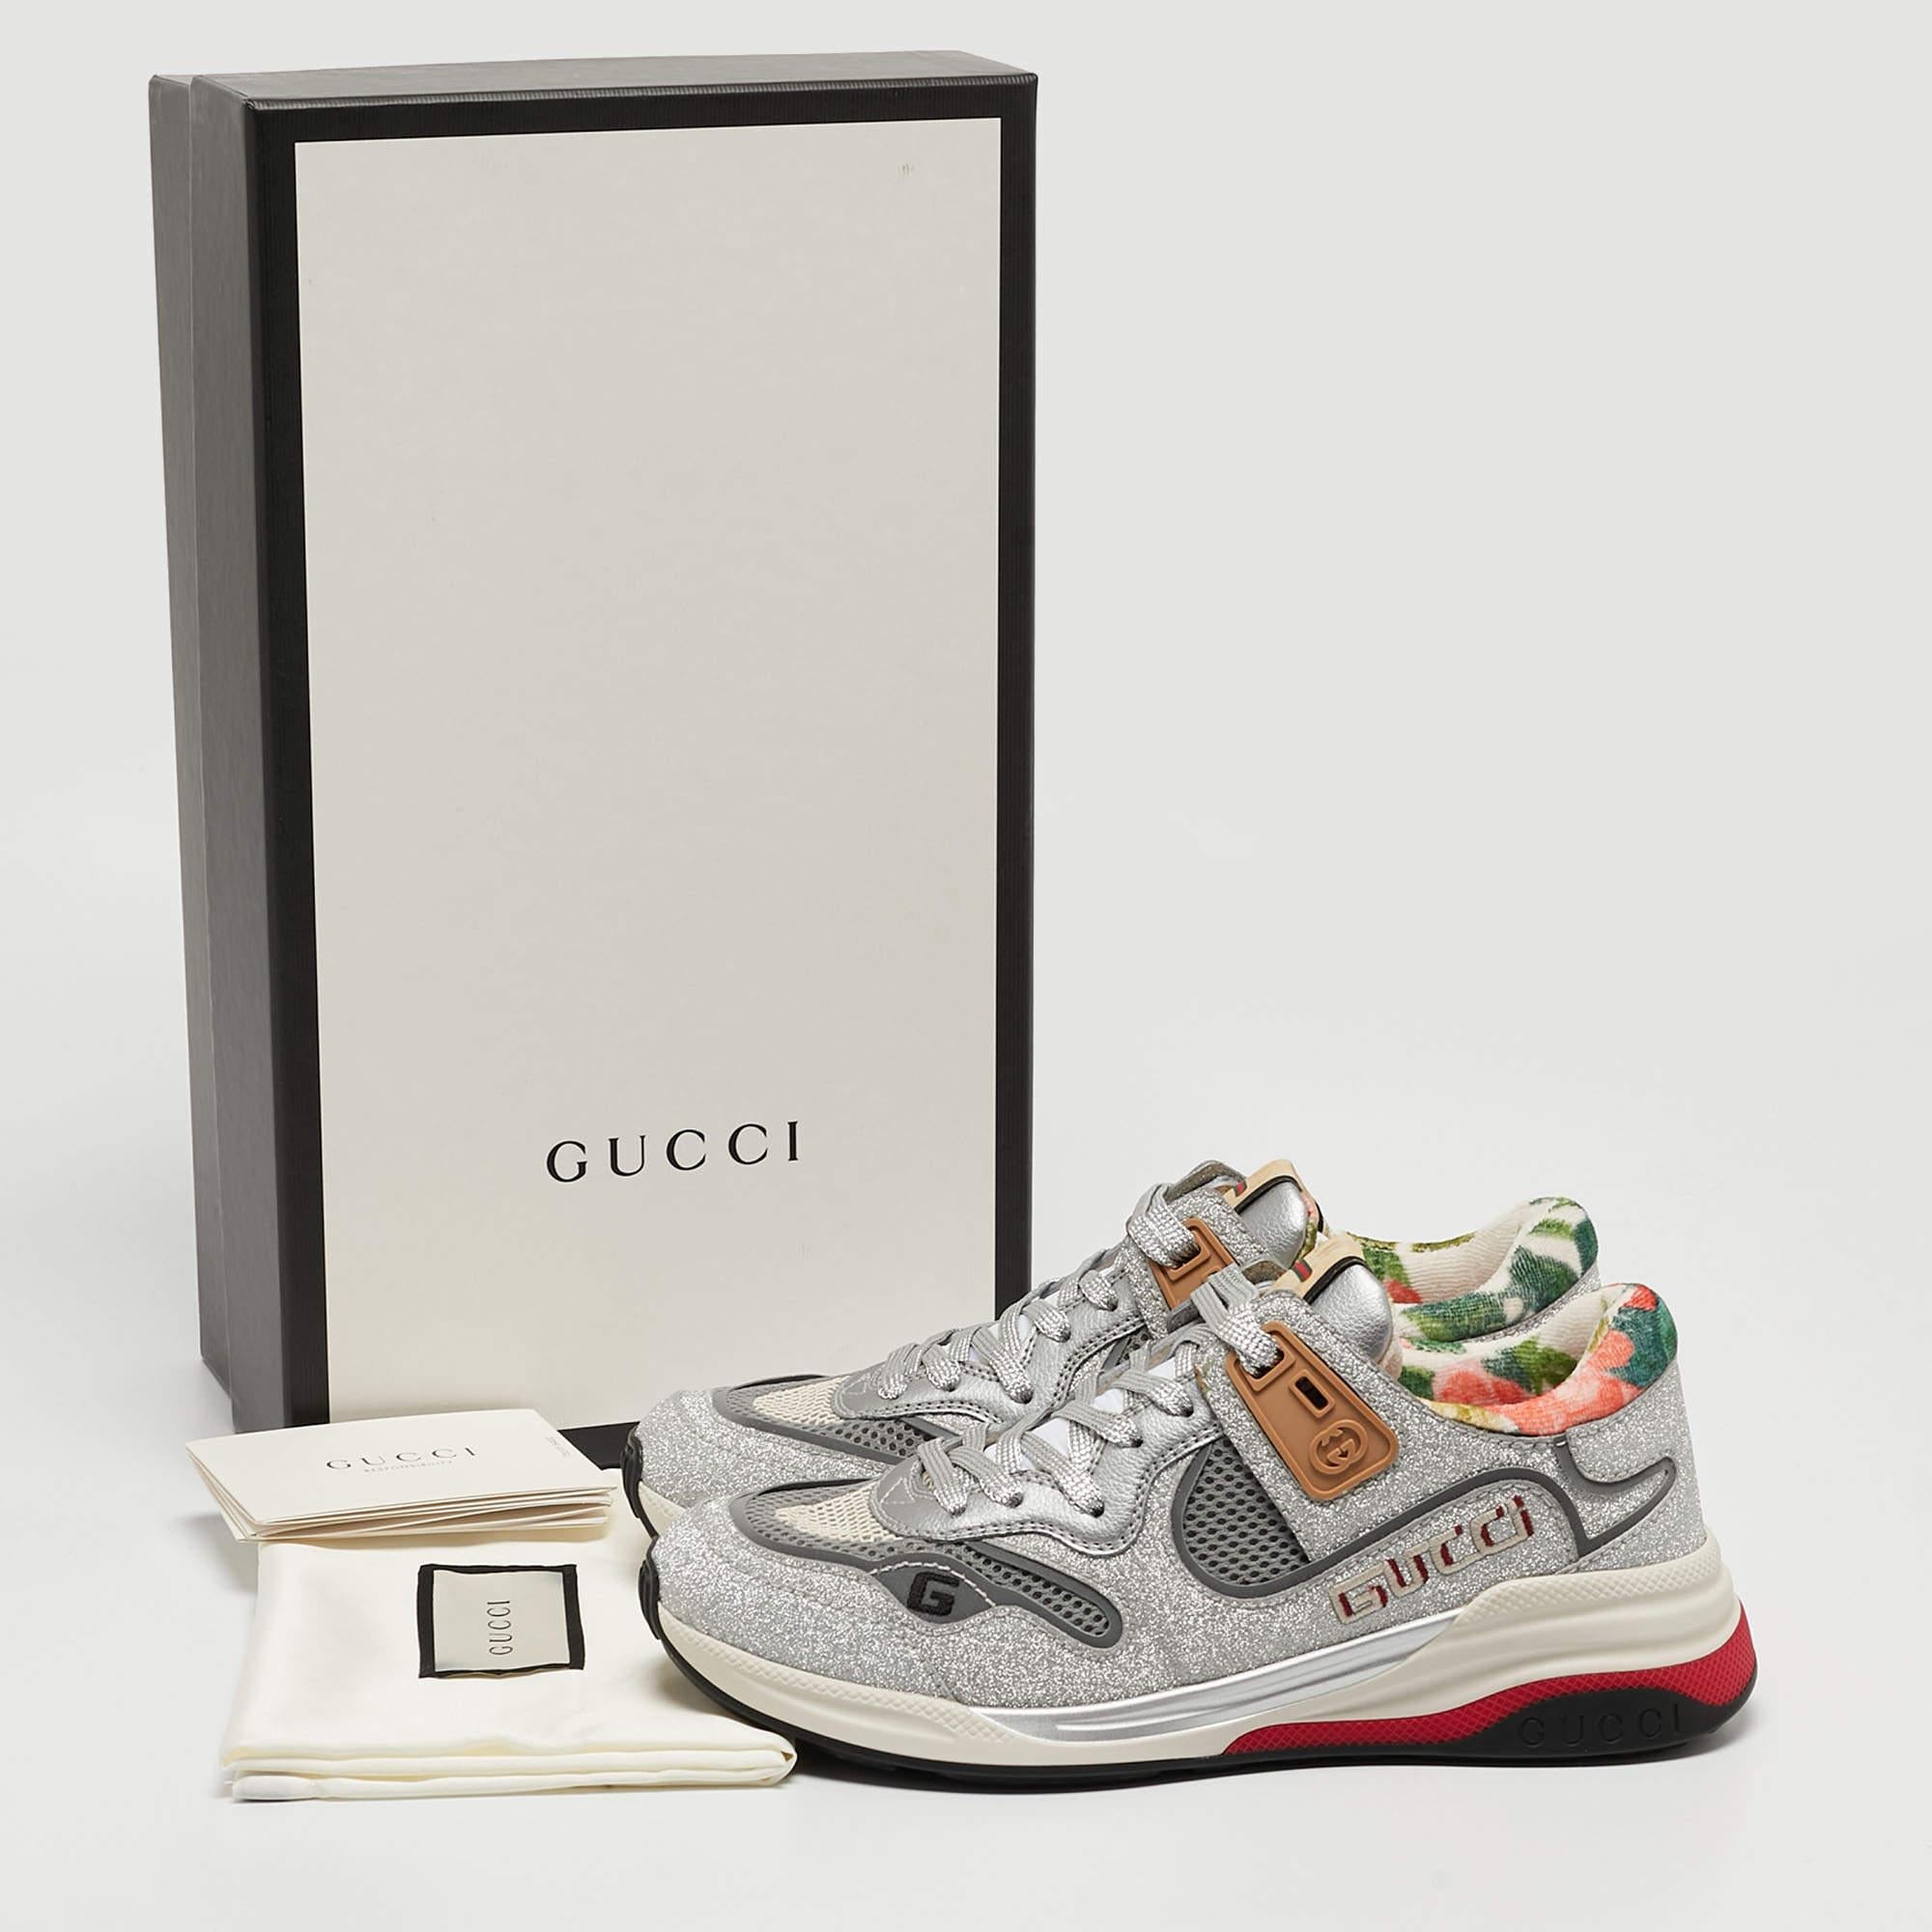 Gucci Silver/Grey Glitter and Mesh Ultrapace Sneakers Size 36.5 4